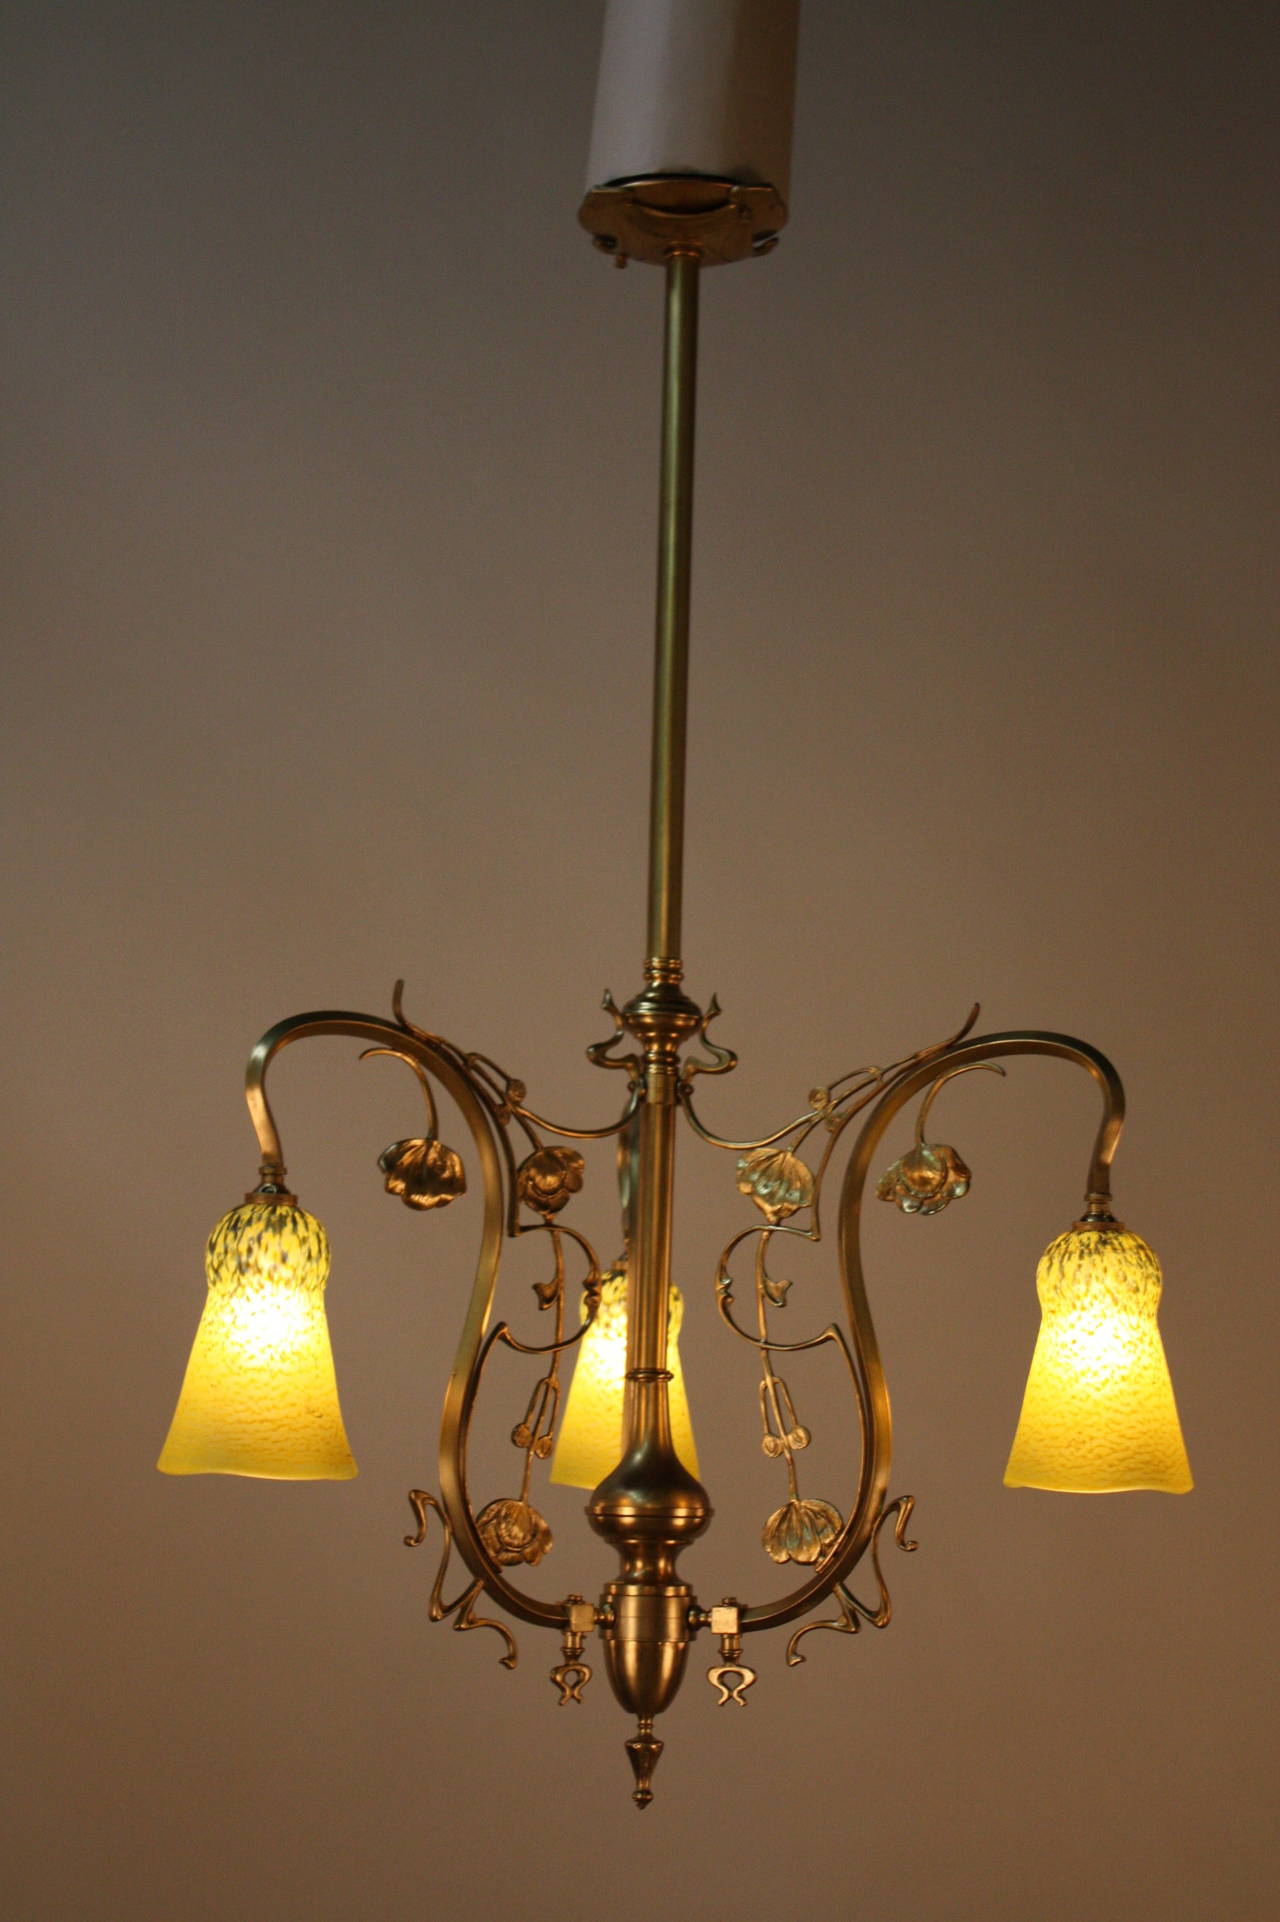 Exceptional Art Nouveau electrified three-light late 19th century gas chandelier with beautiful art glass shades.
This chandelier is 23